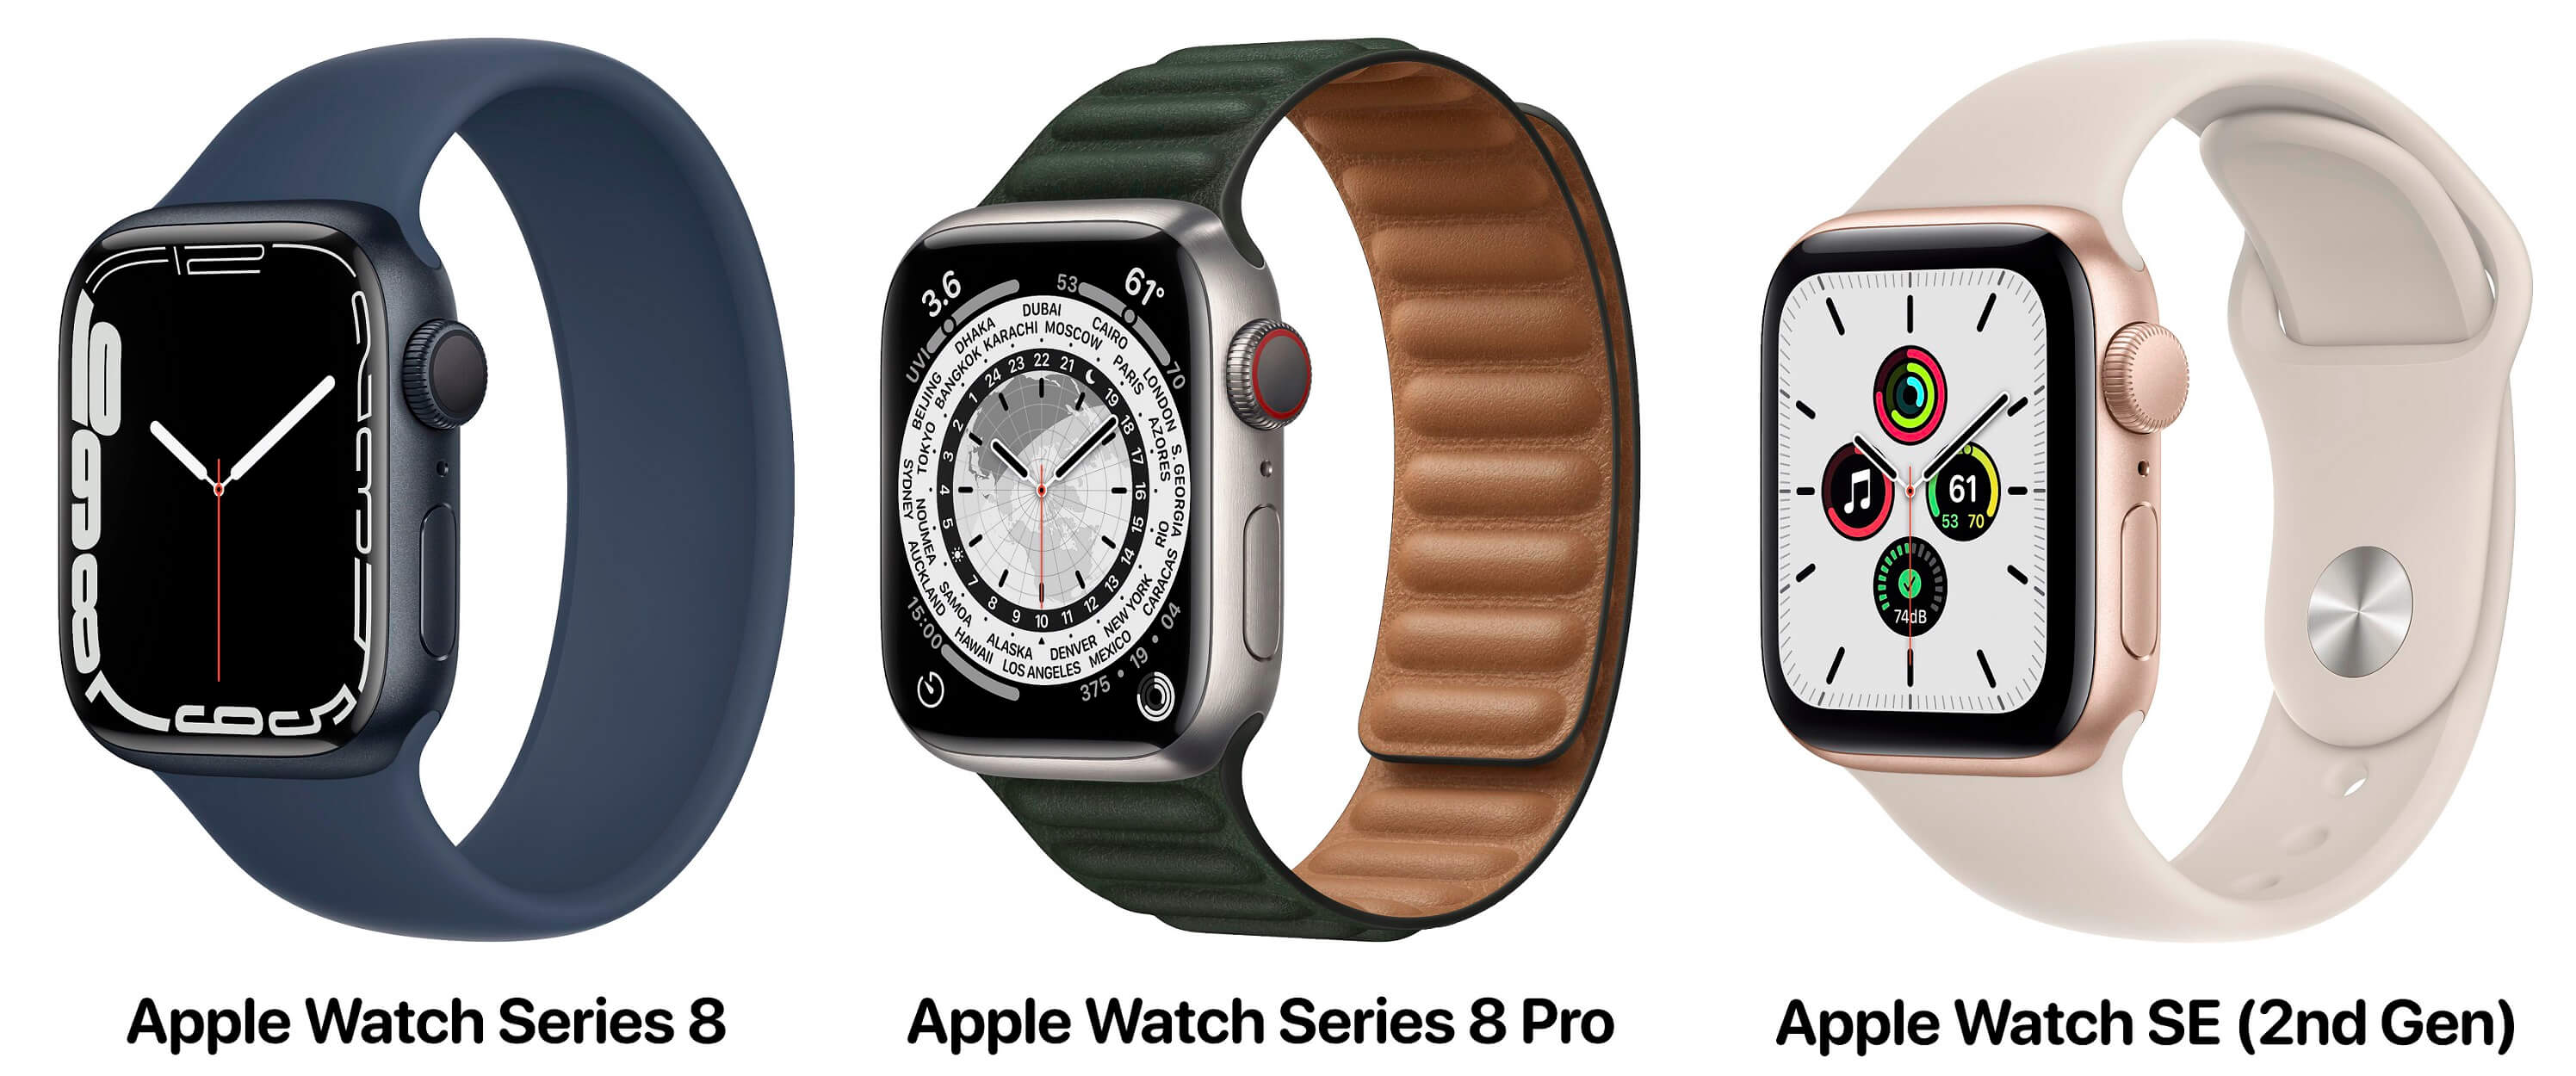 Apple Watch series 8 and Watch SE 2nd